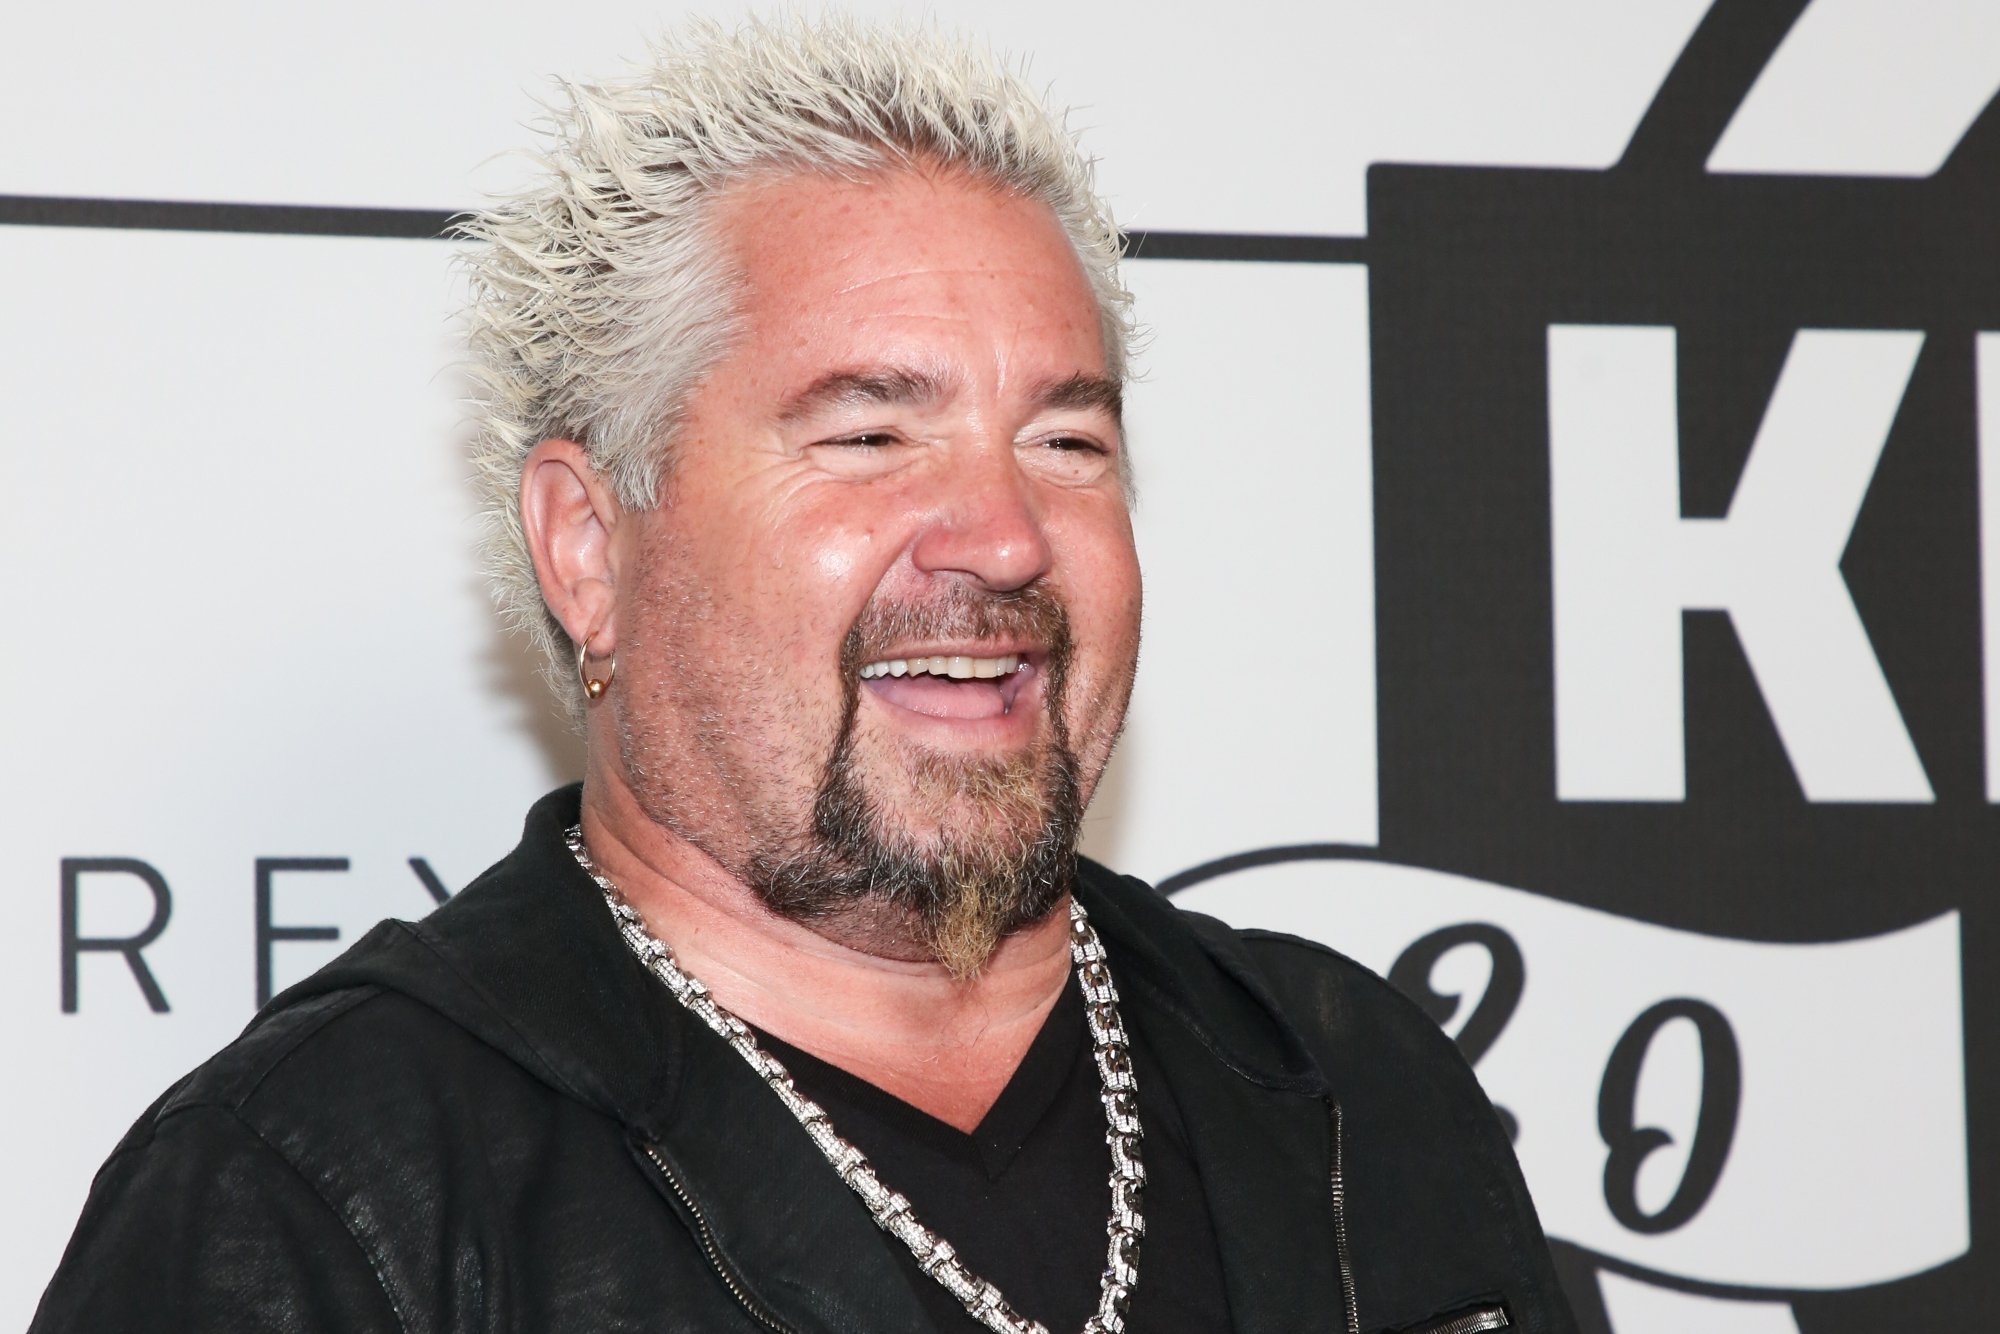 Potential future 'Saturday Night Live' host Guy Fieri. He's giving an open mouth smile, wearing a black shirt, and a chain necklace in front of a backdrop